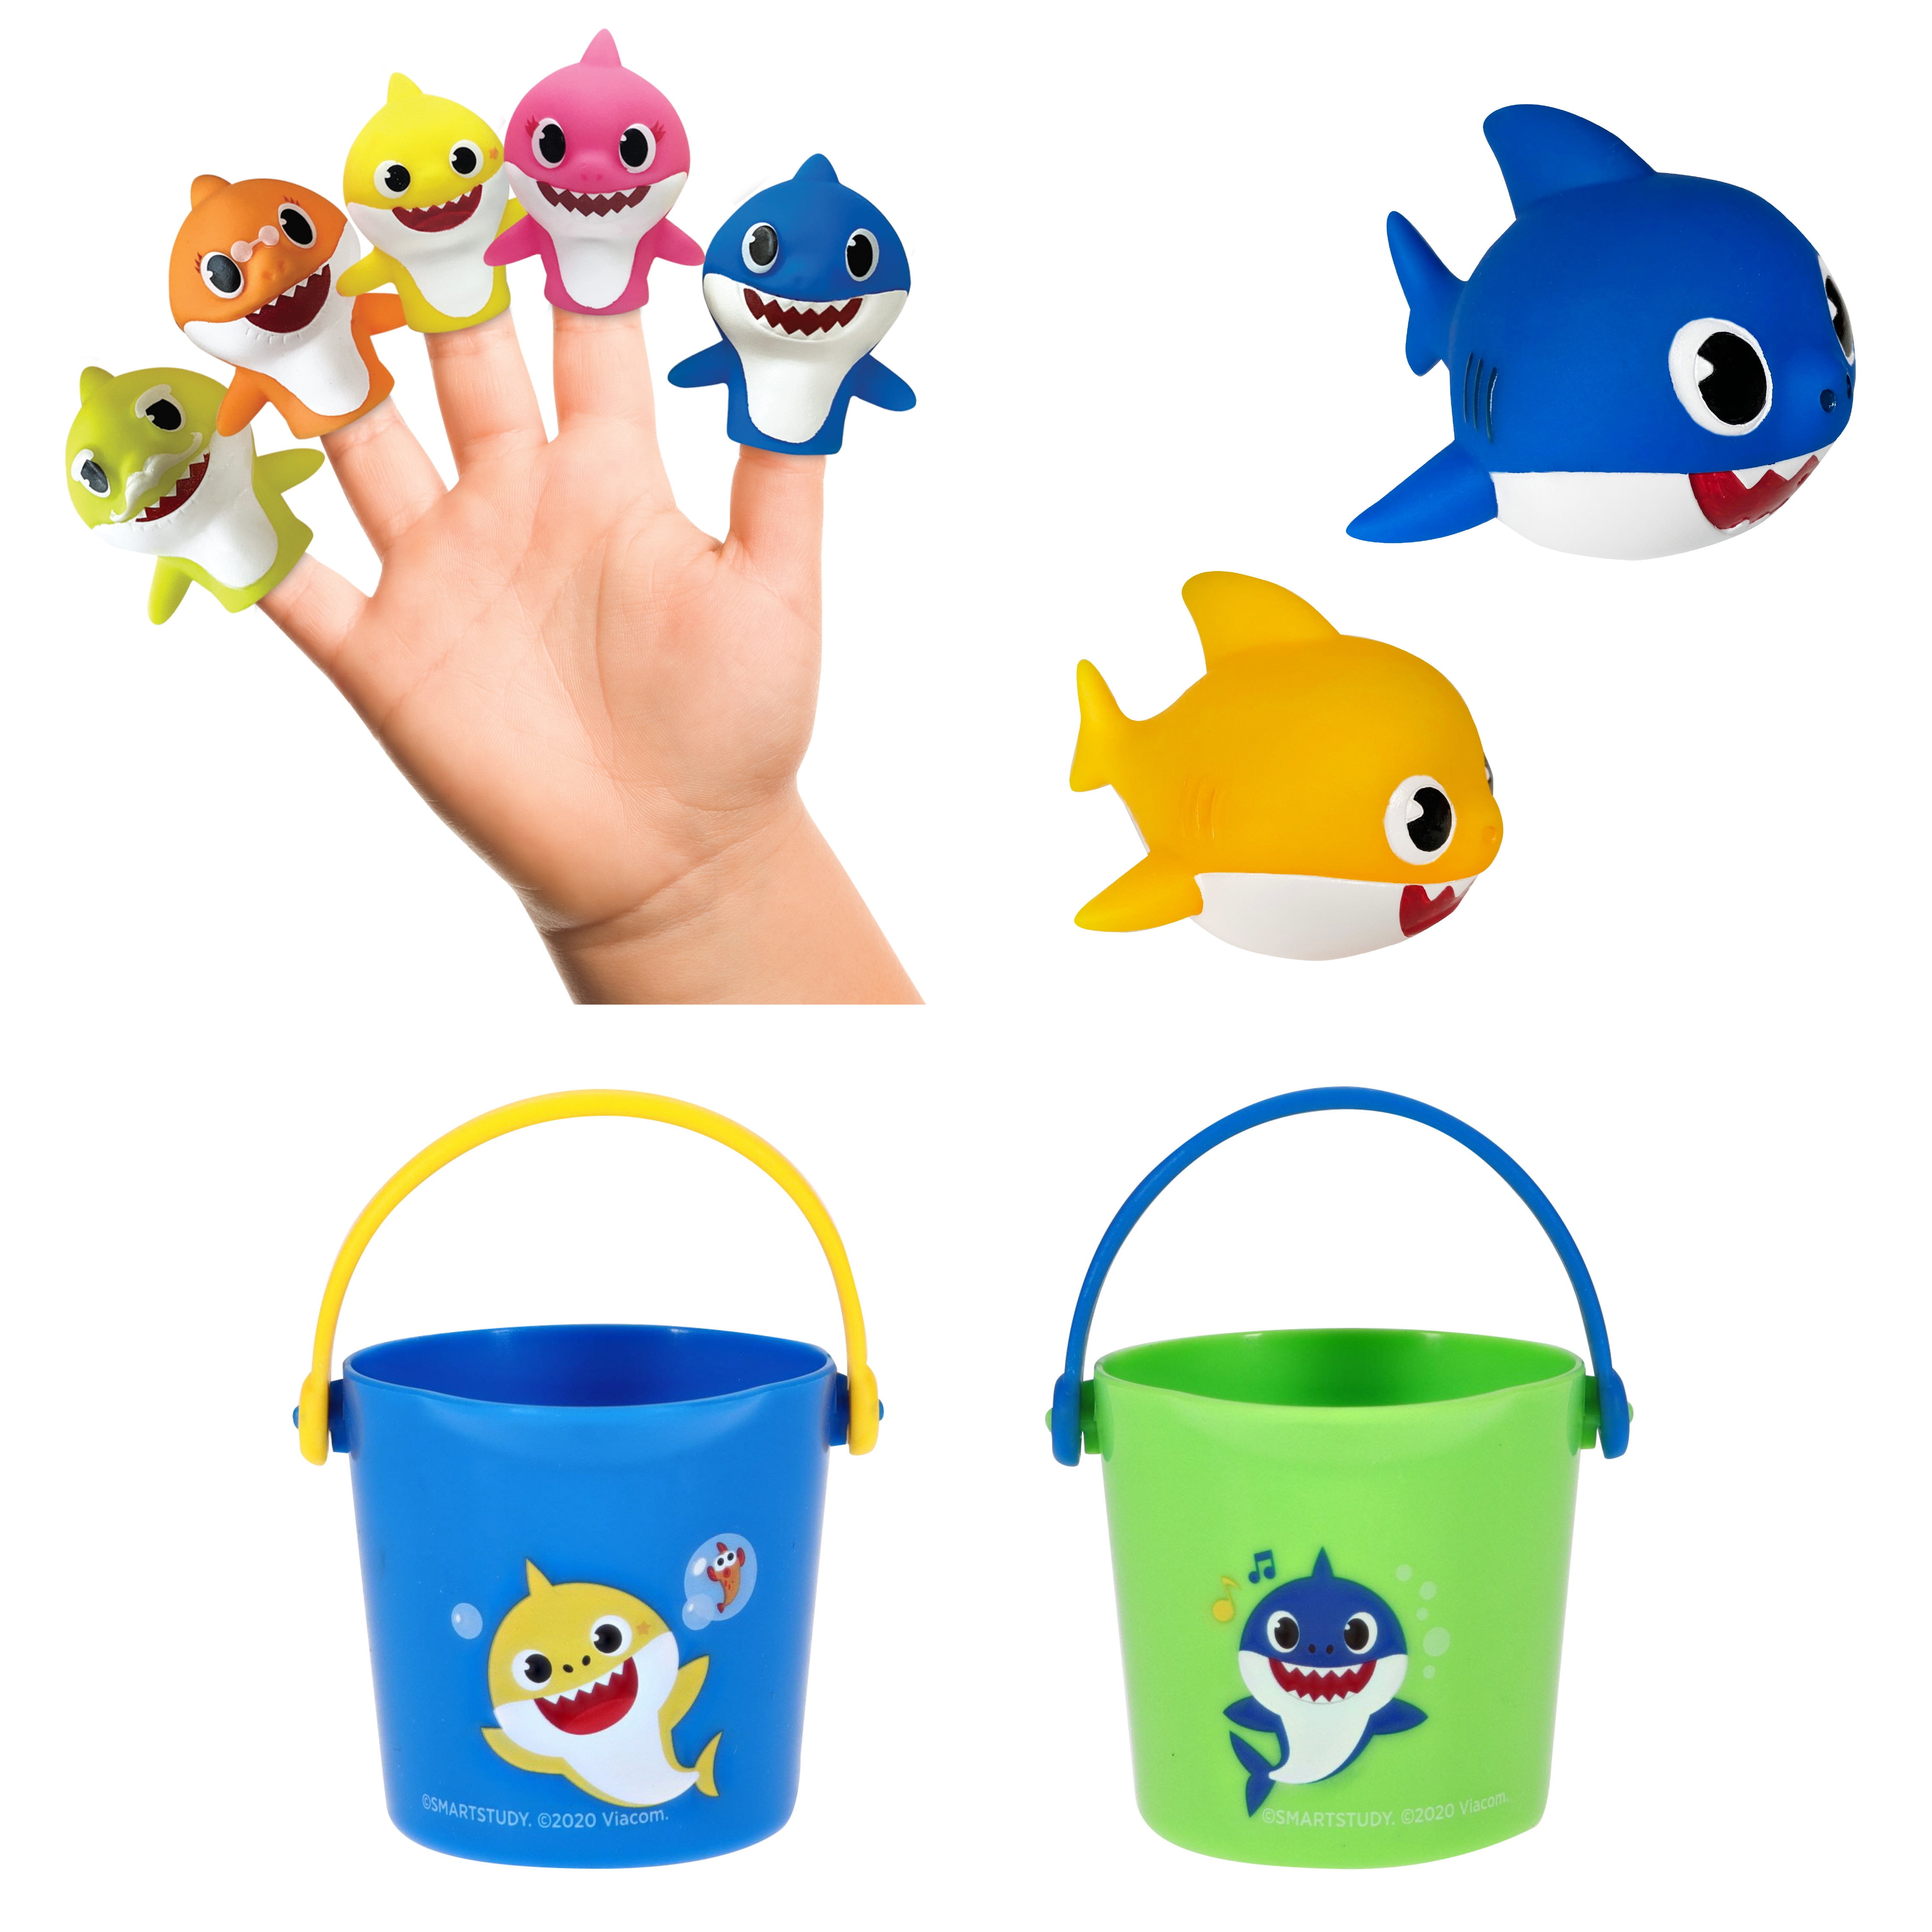 Baby Shark's Big Show! Bath Squirt Toys, Bath Time Set, For Ages 1 